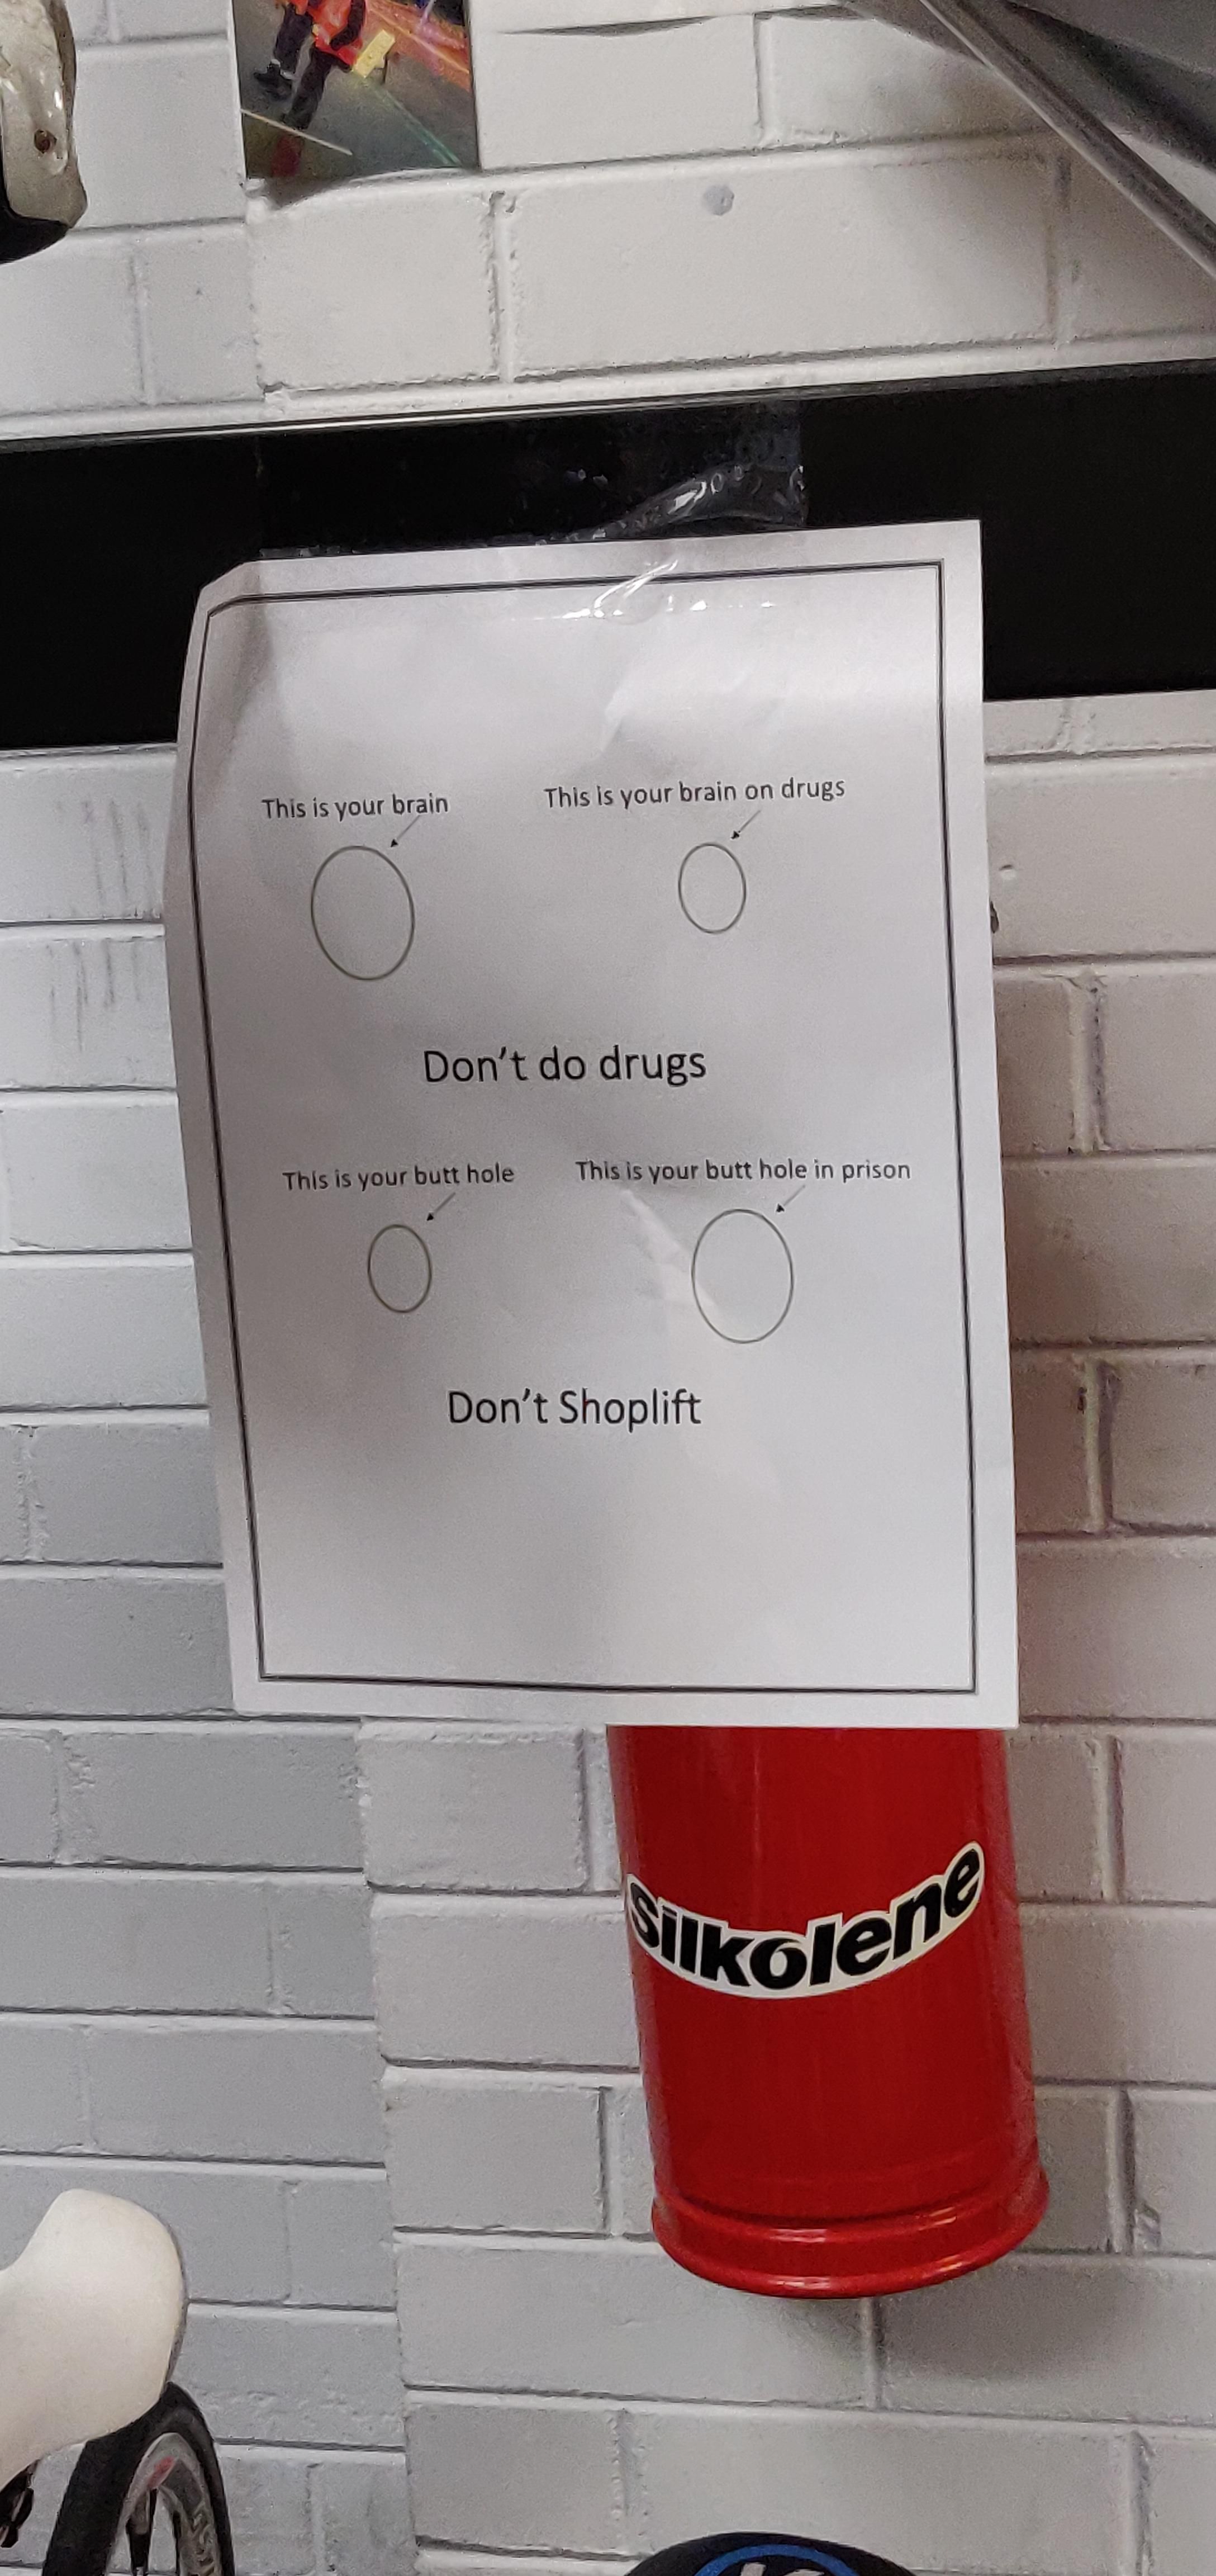 Drugs and shoplifting analogy in a bike shop in Perth, WA.